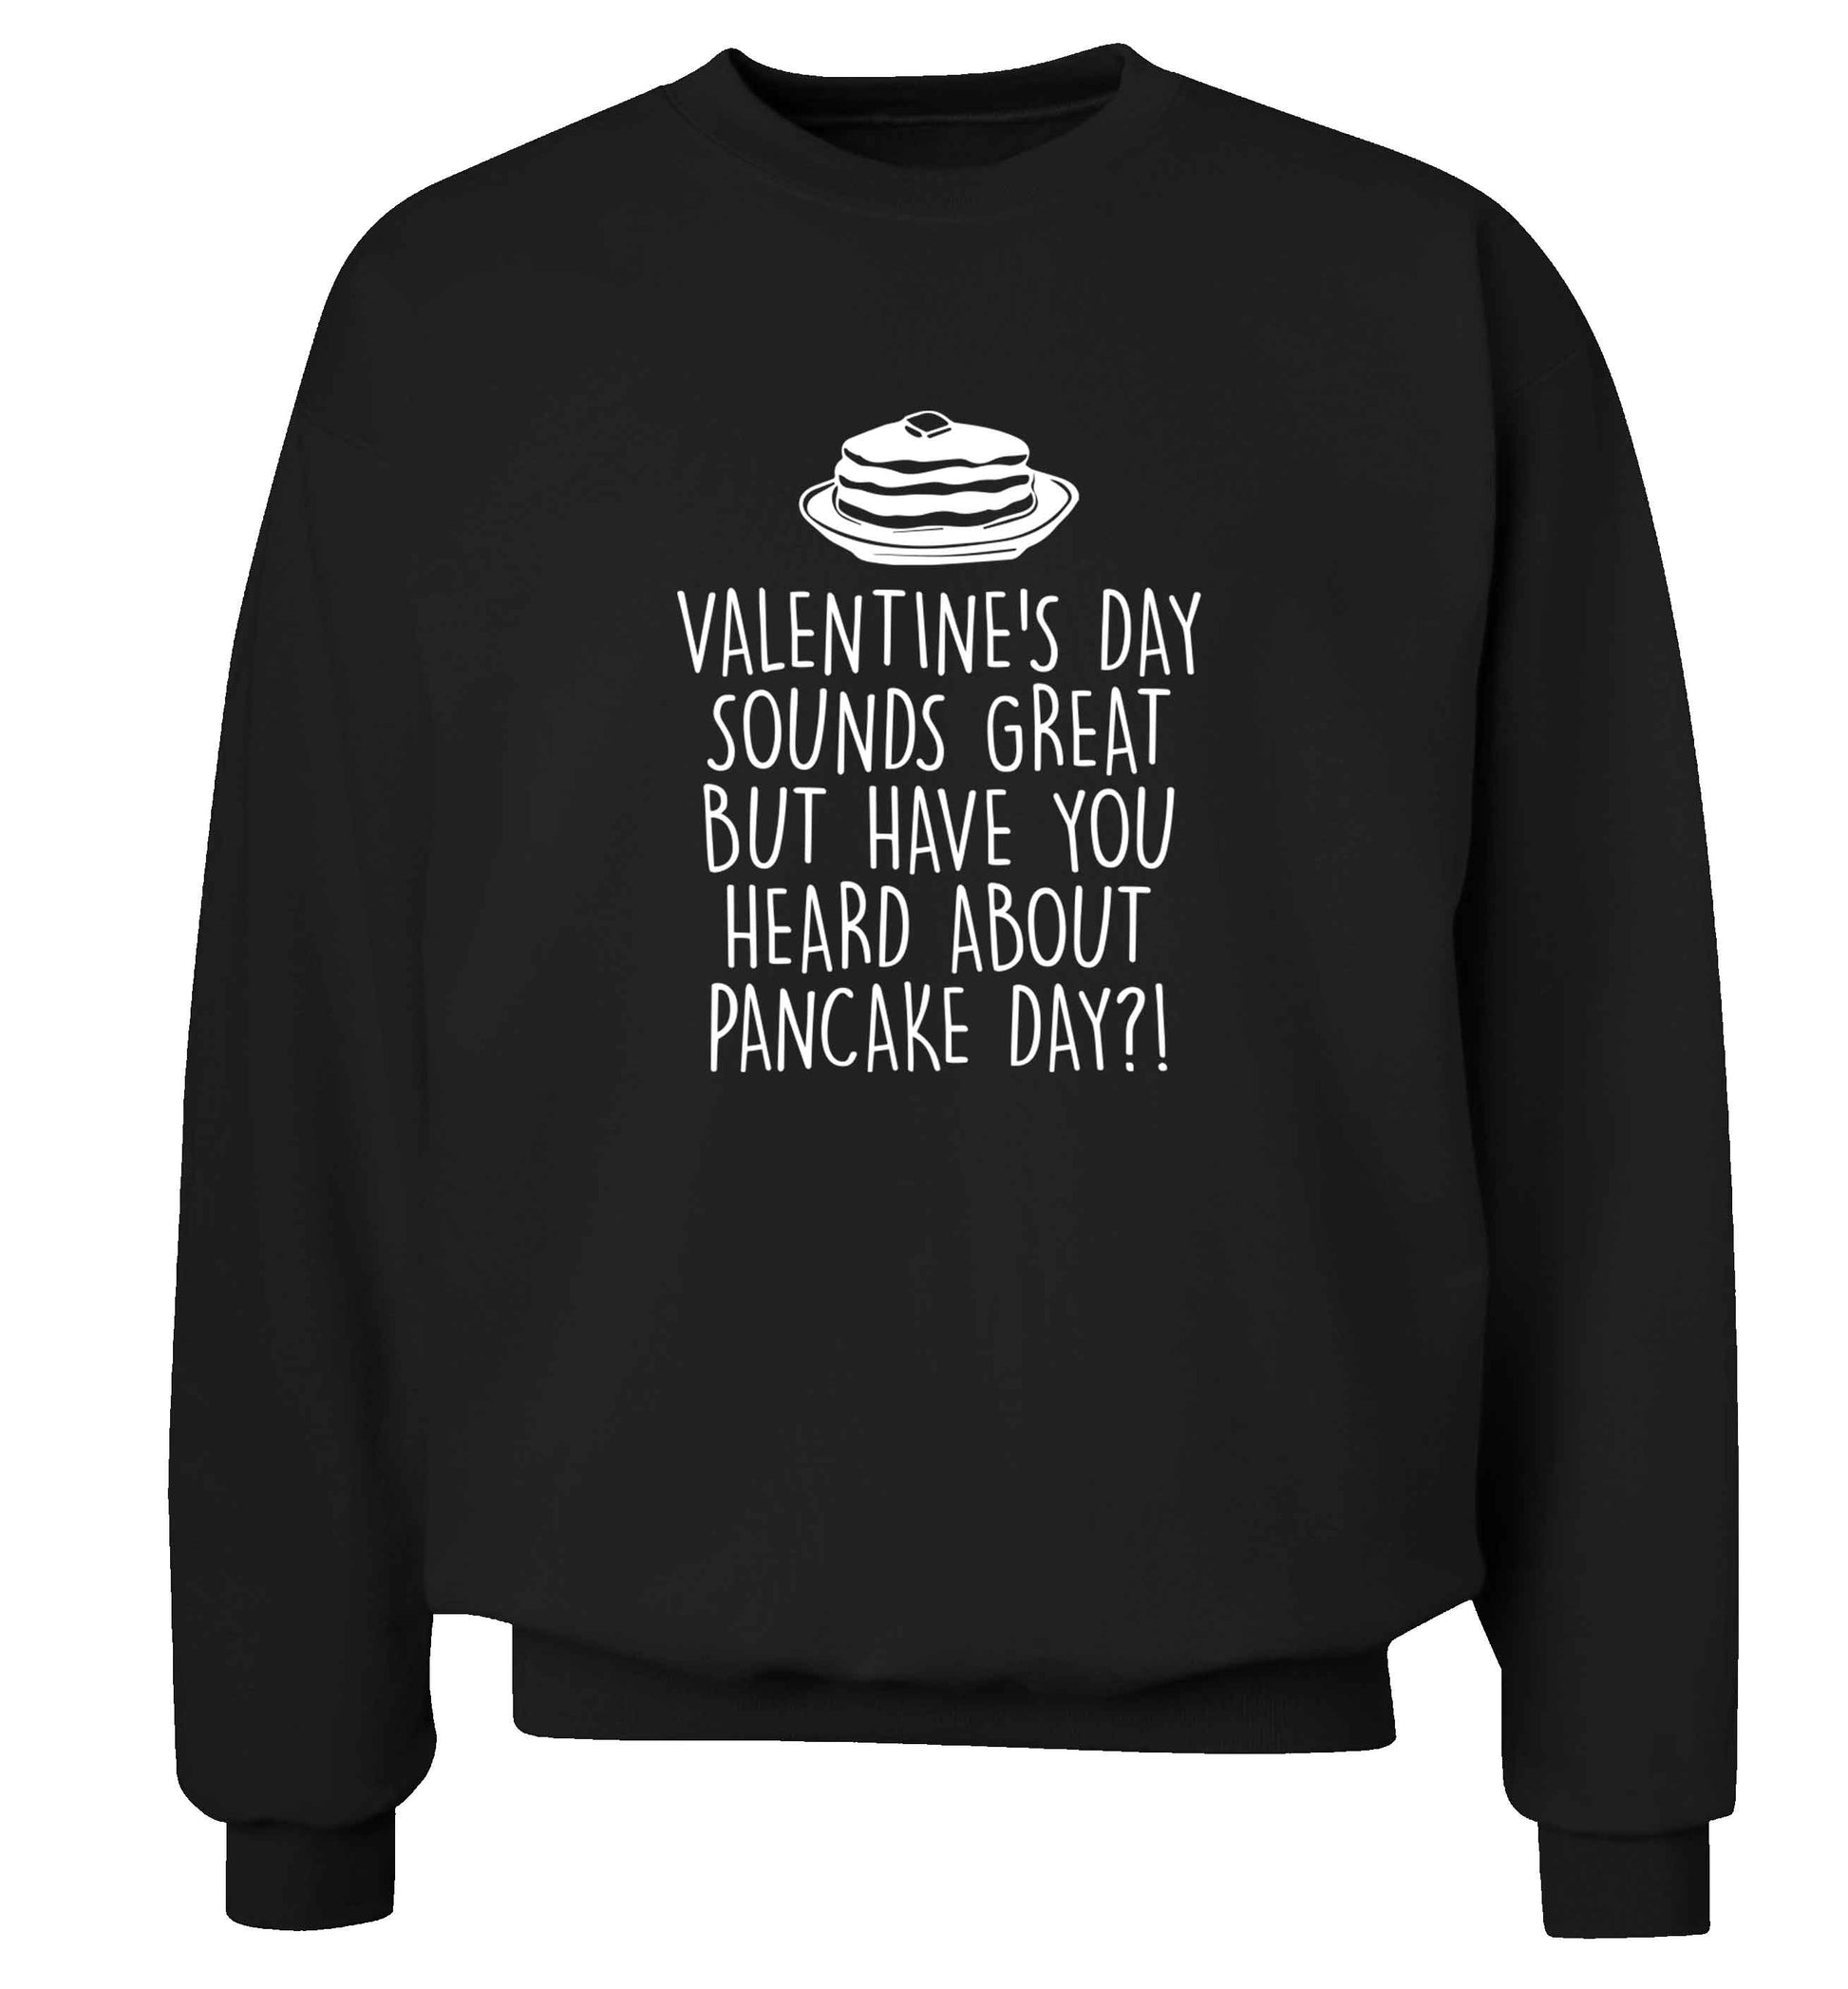 Valentine's day sounds great but have you heard about pancake day?! adult's unisex black sweater 2XL